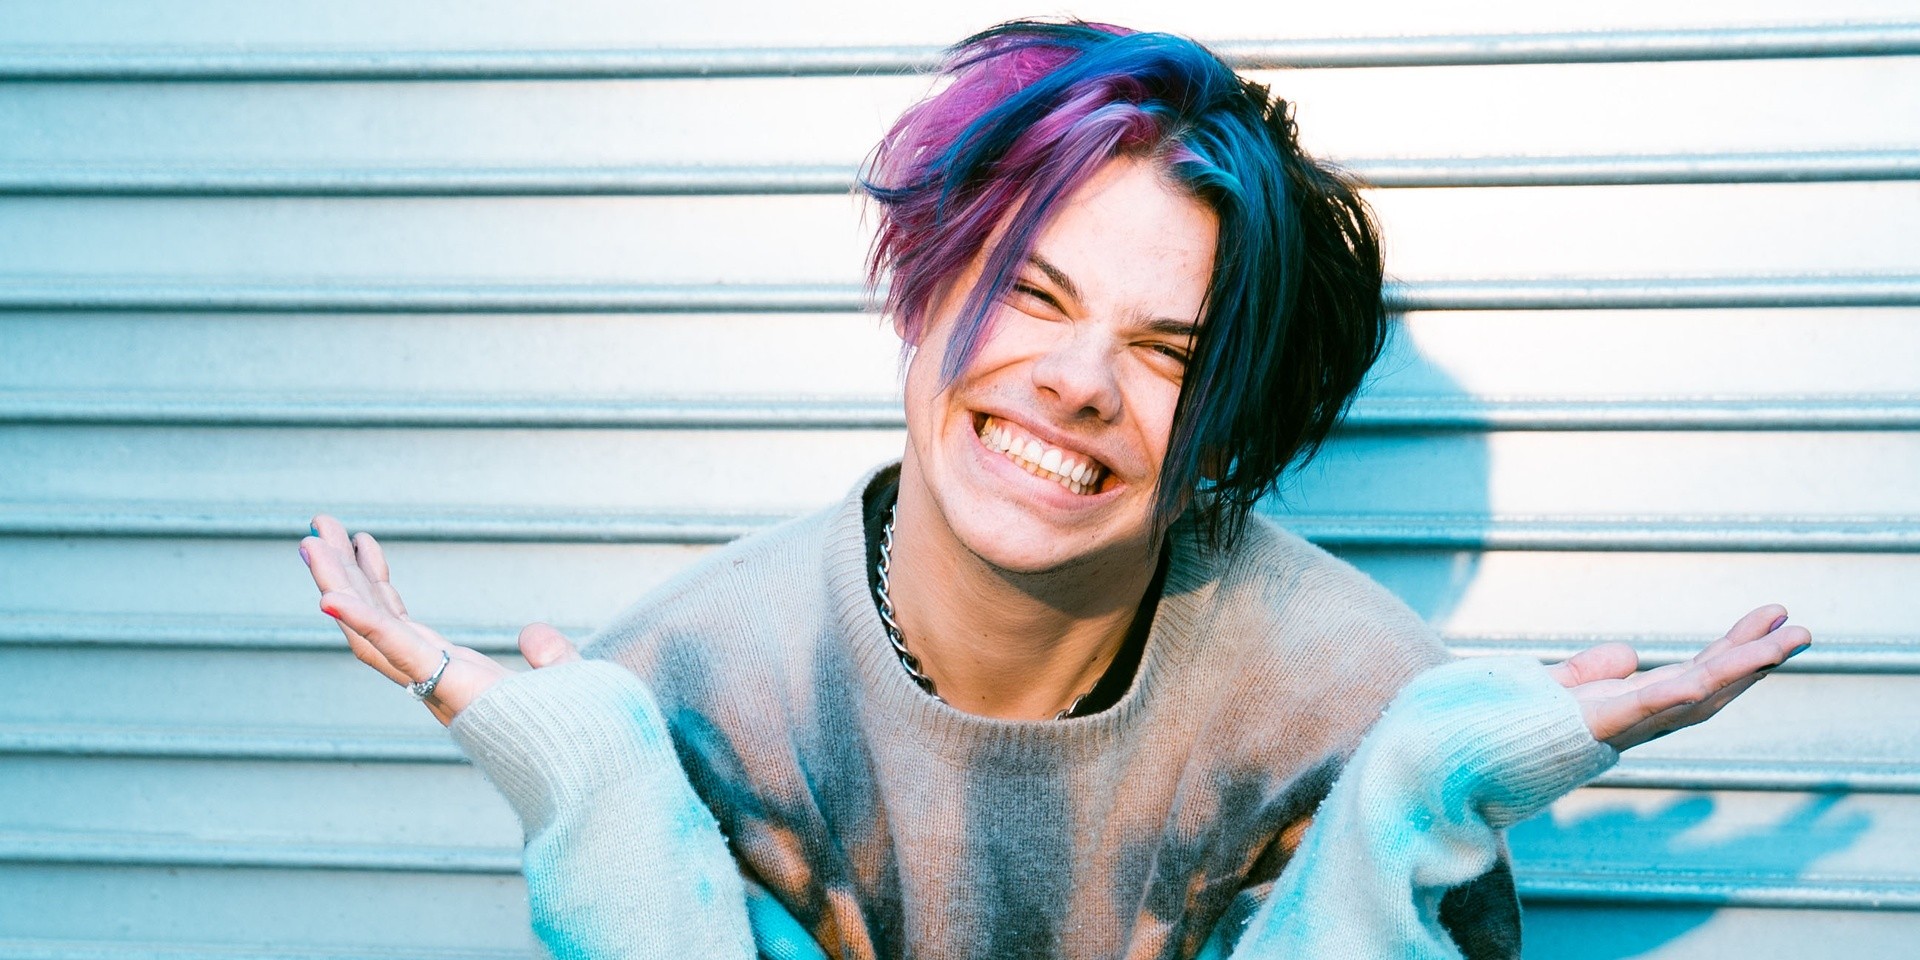 "It’s about being unified in love, in acceptance, in equality": YUNGBLUD on the role of his 'Weird' music in today's society